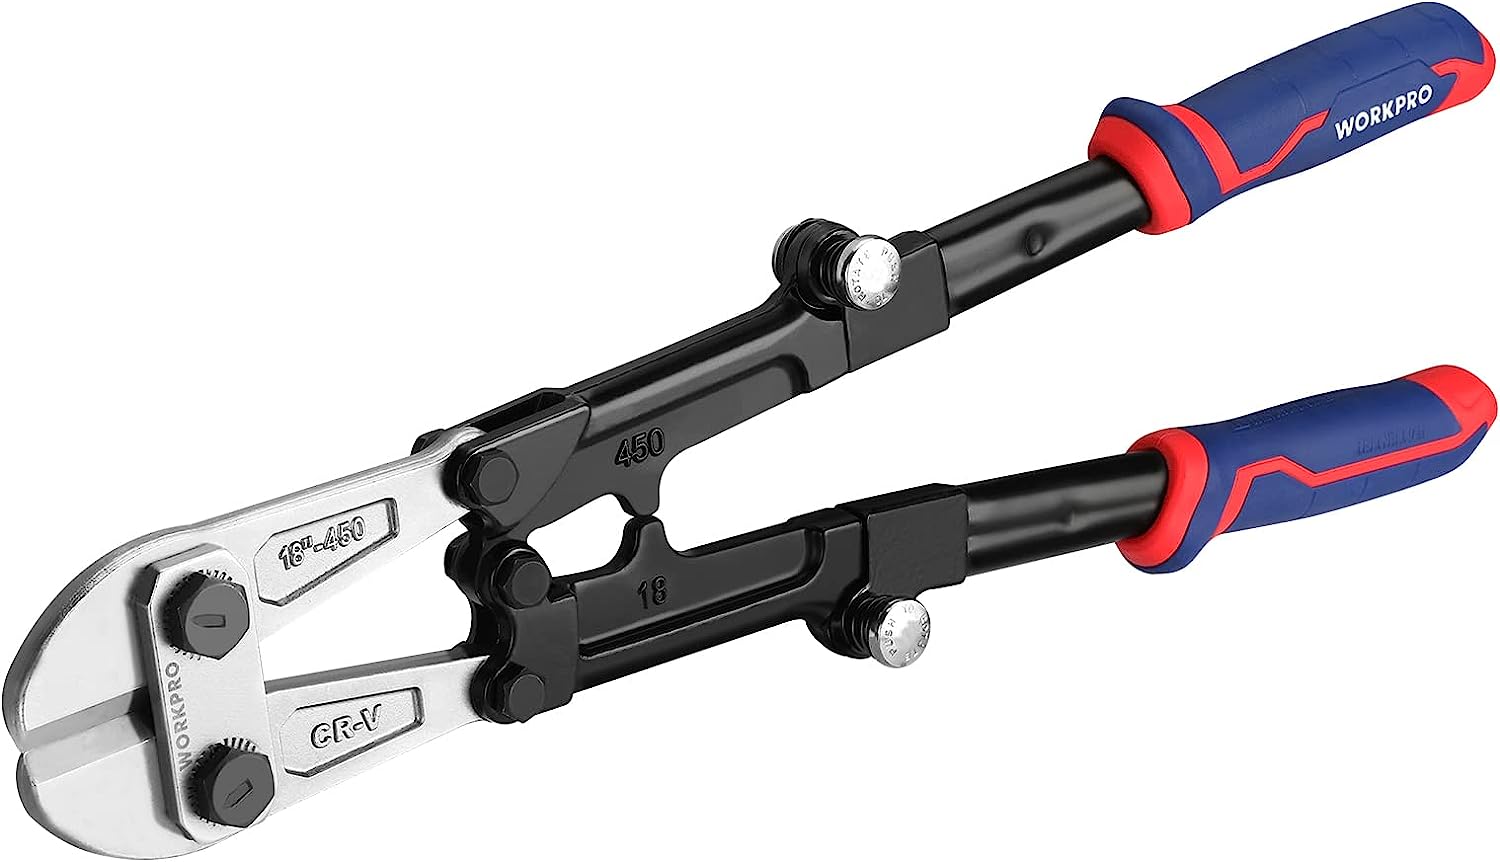 WORKPRO 18-Inch Foldable Bolt Cutter, Tri-Material [...]